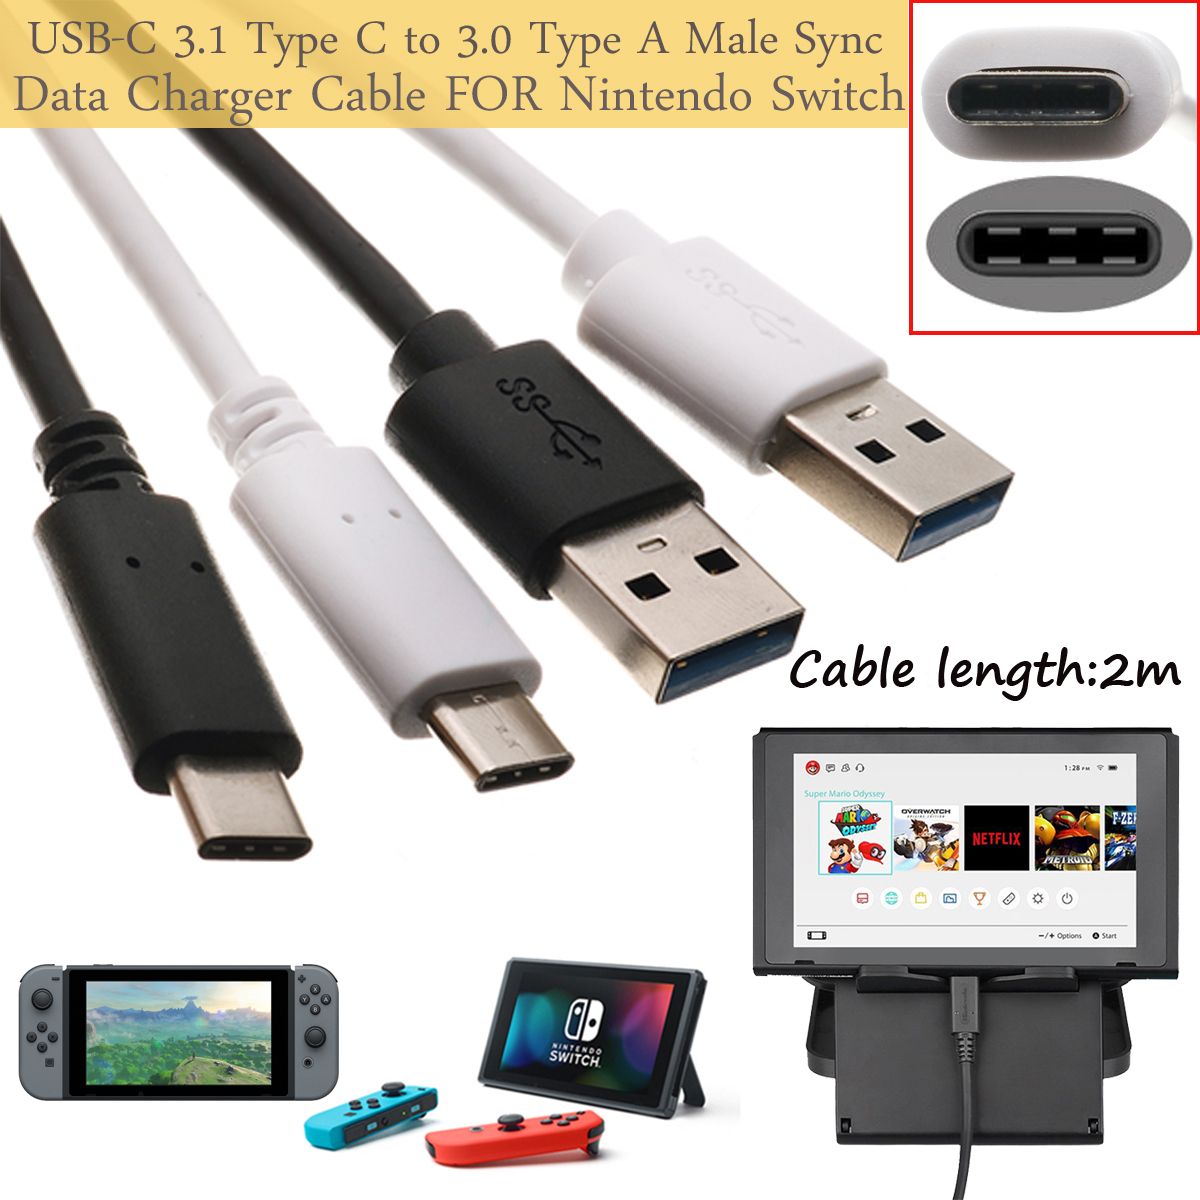 USB-C-31-Type-C-to-30-Type-A-Male-Sync-Data-Charger-Cable-FOR-Nintendo-Switch-1634694